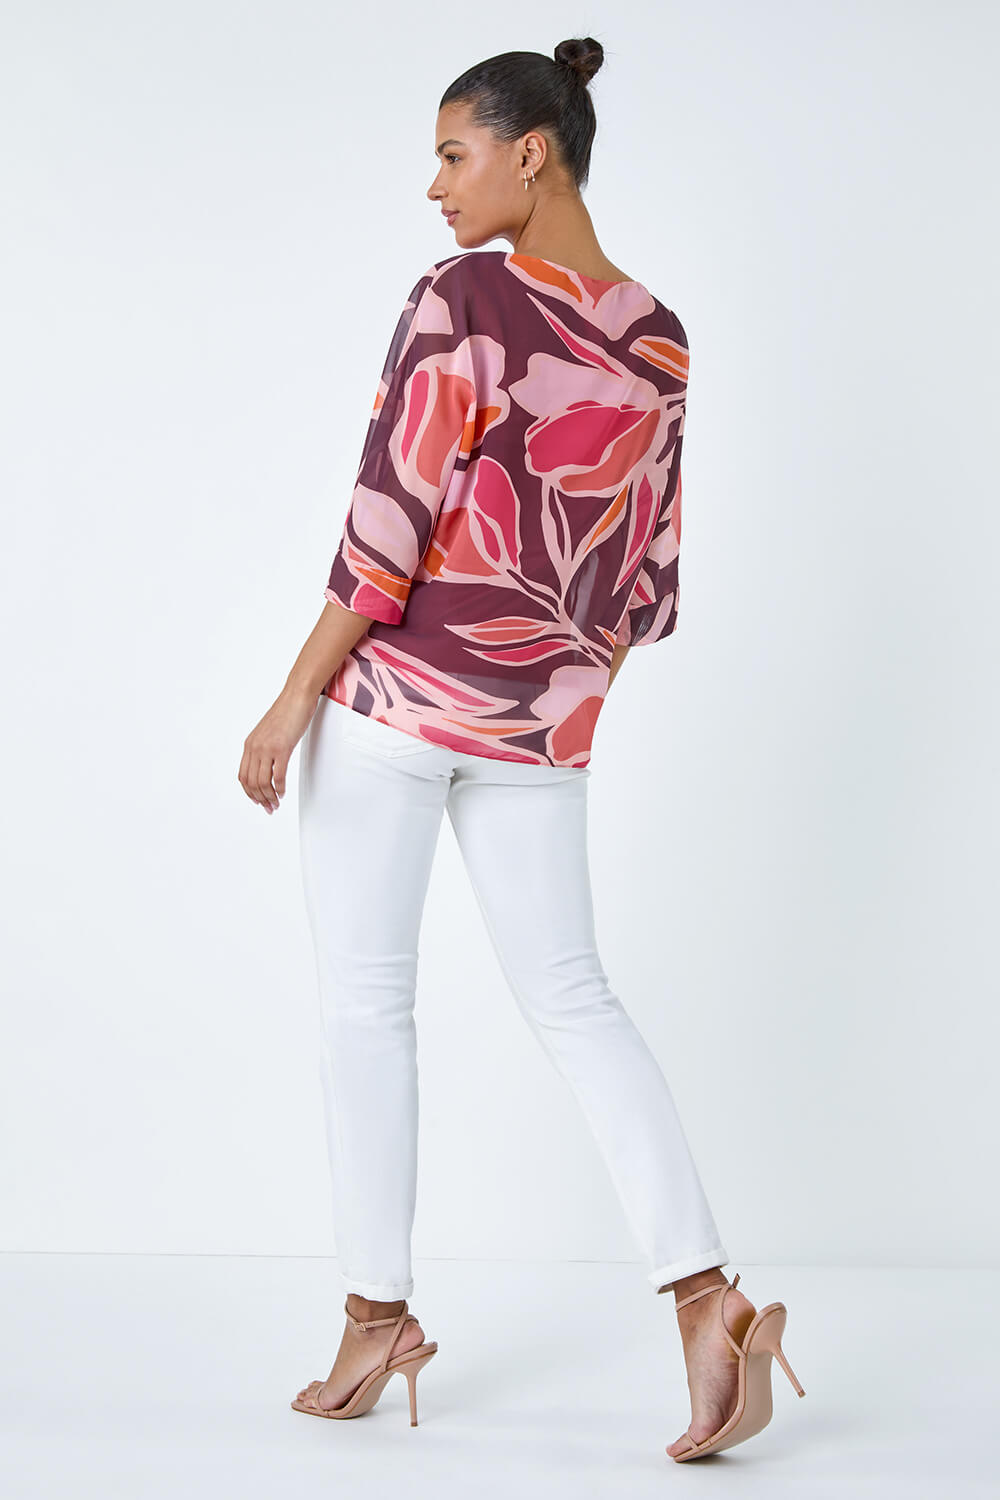 CORAL Floral Print Overlay Top, Image 3 of 5